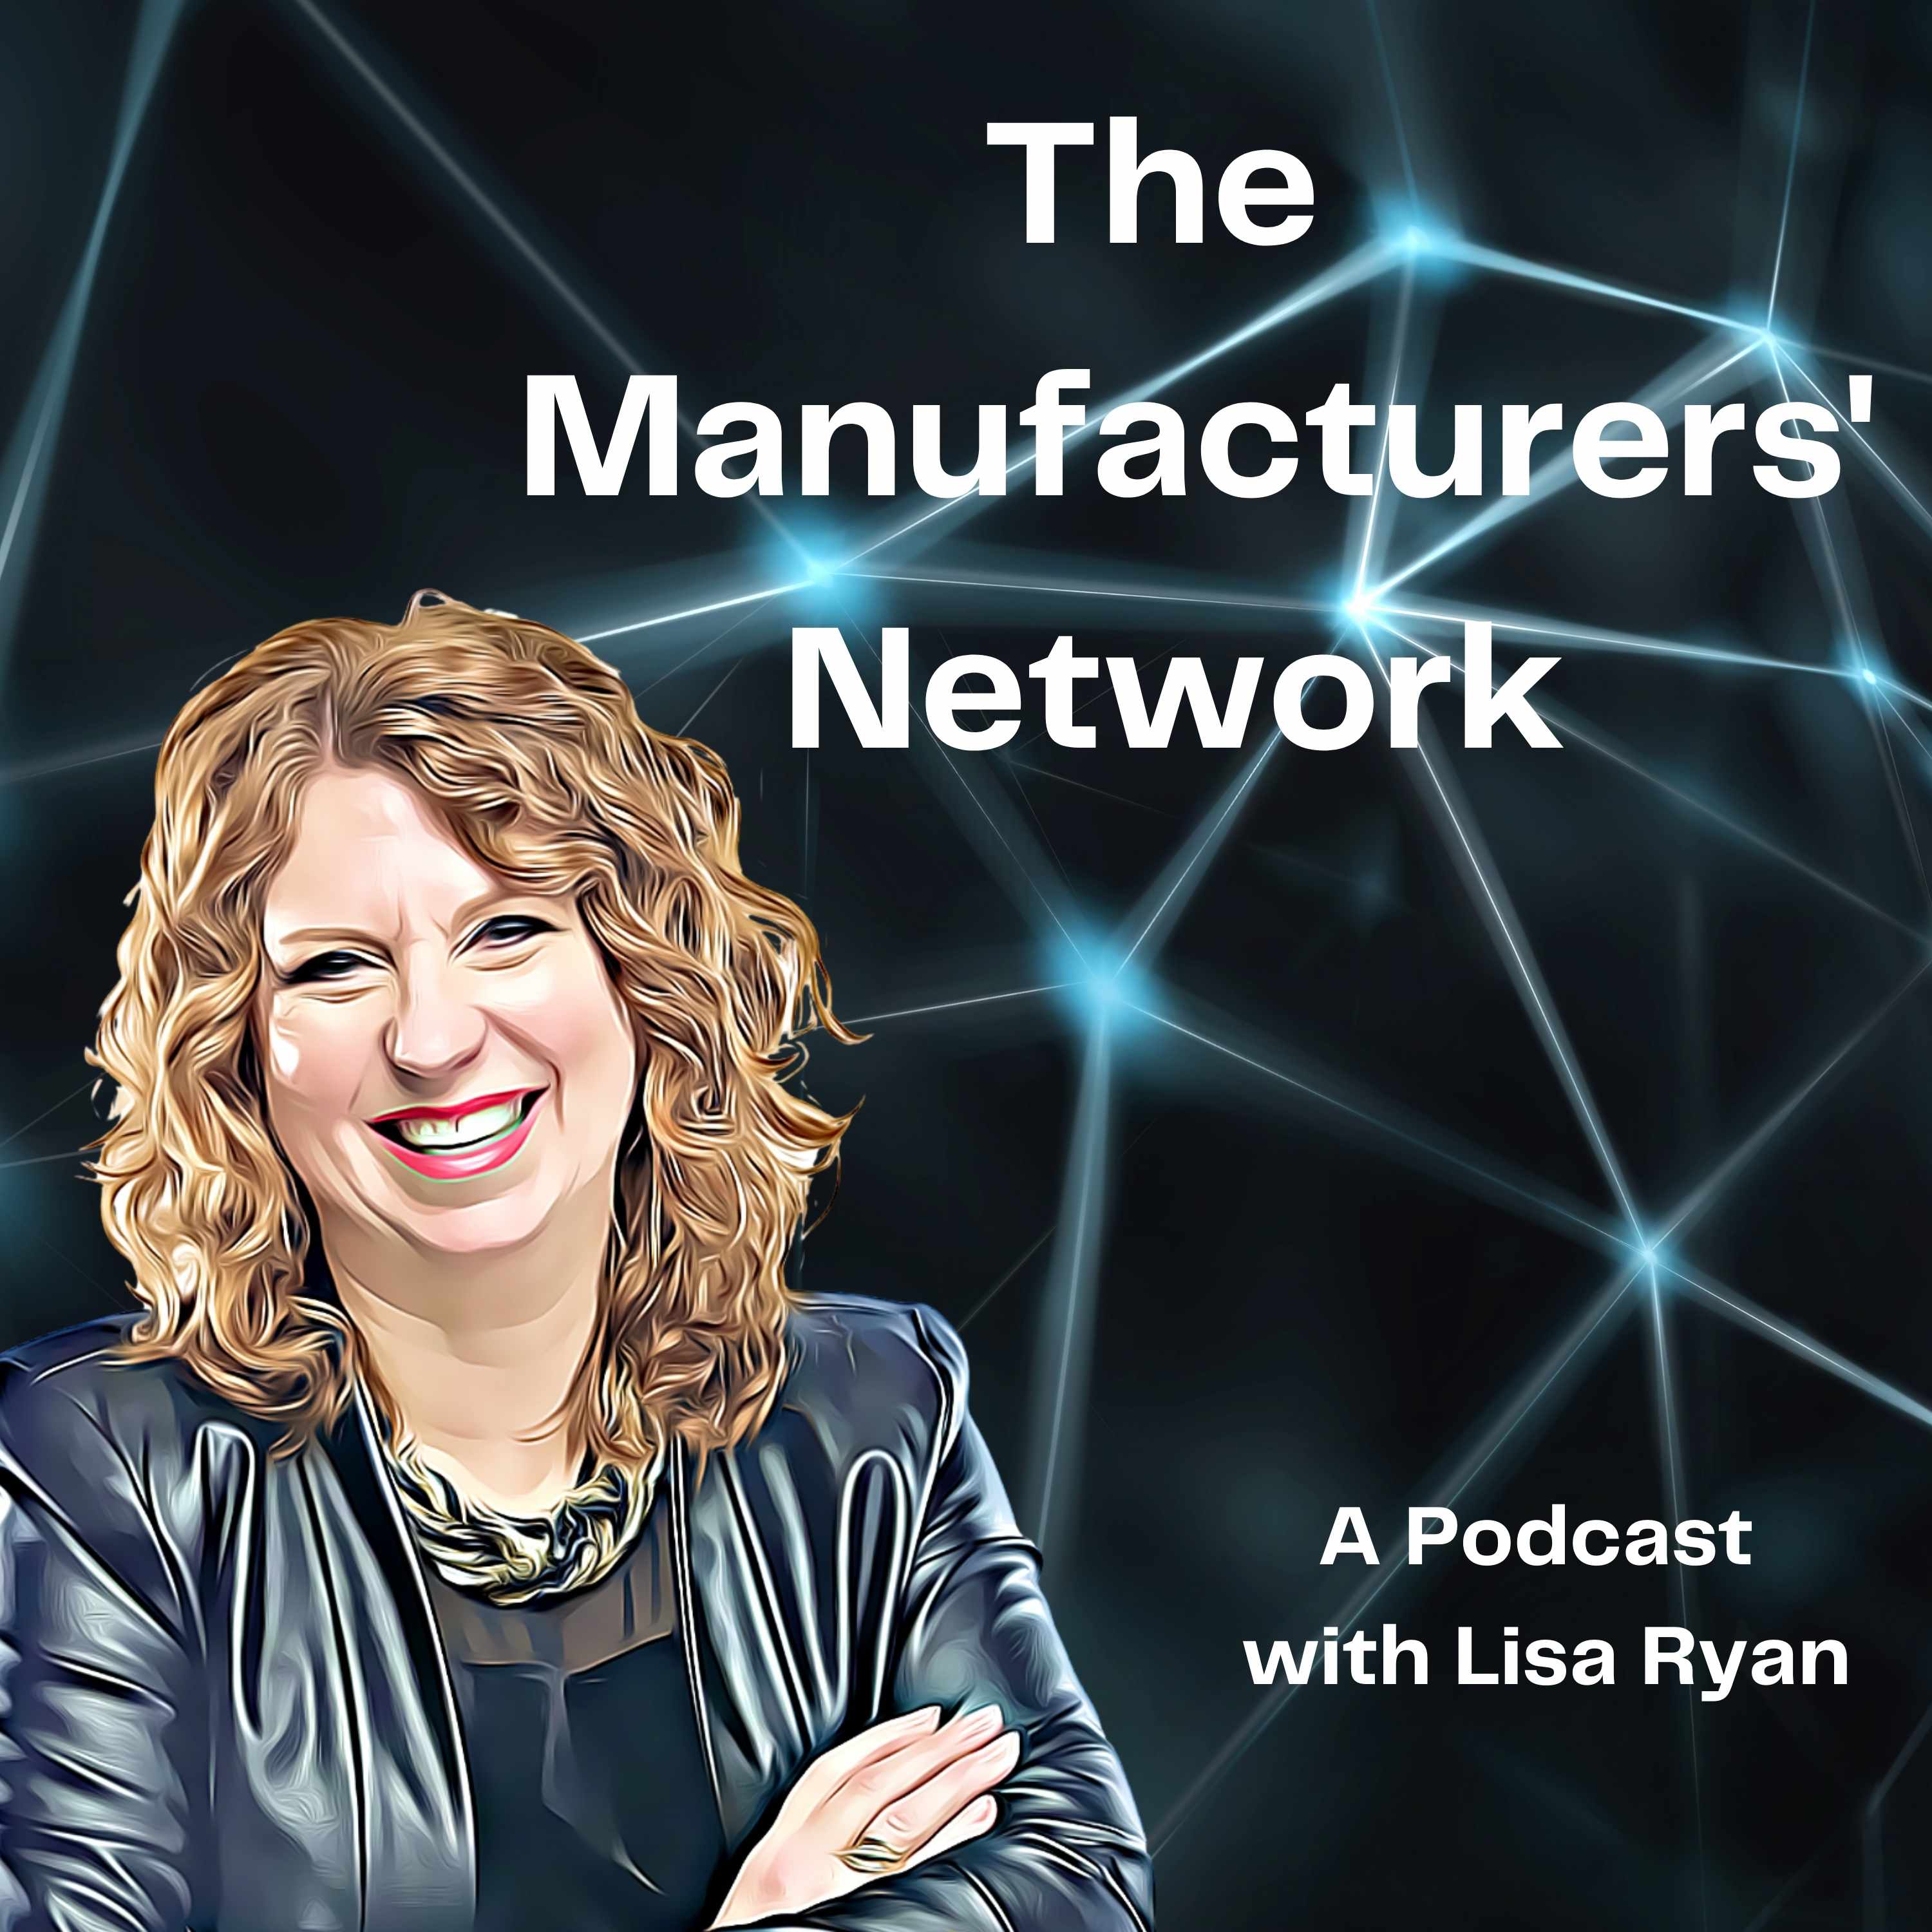 Artwork for podcast The Manufacturers' Network